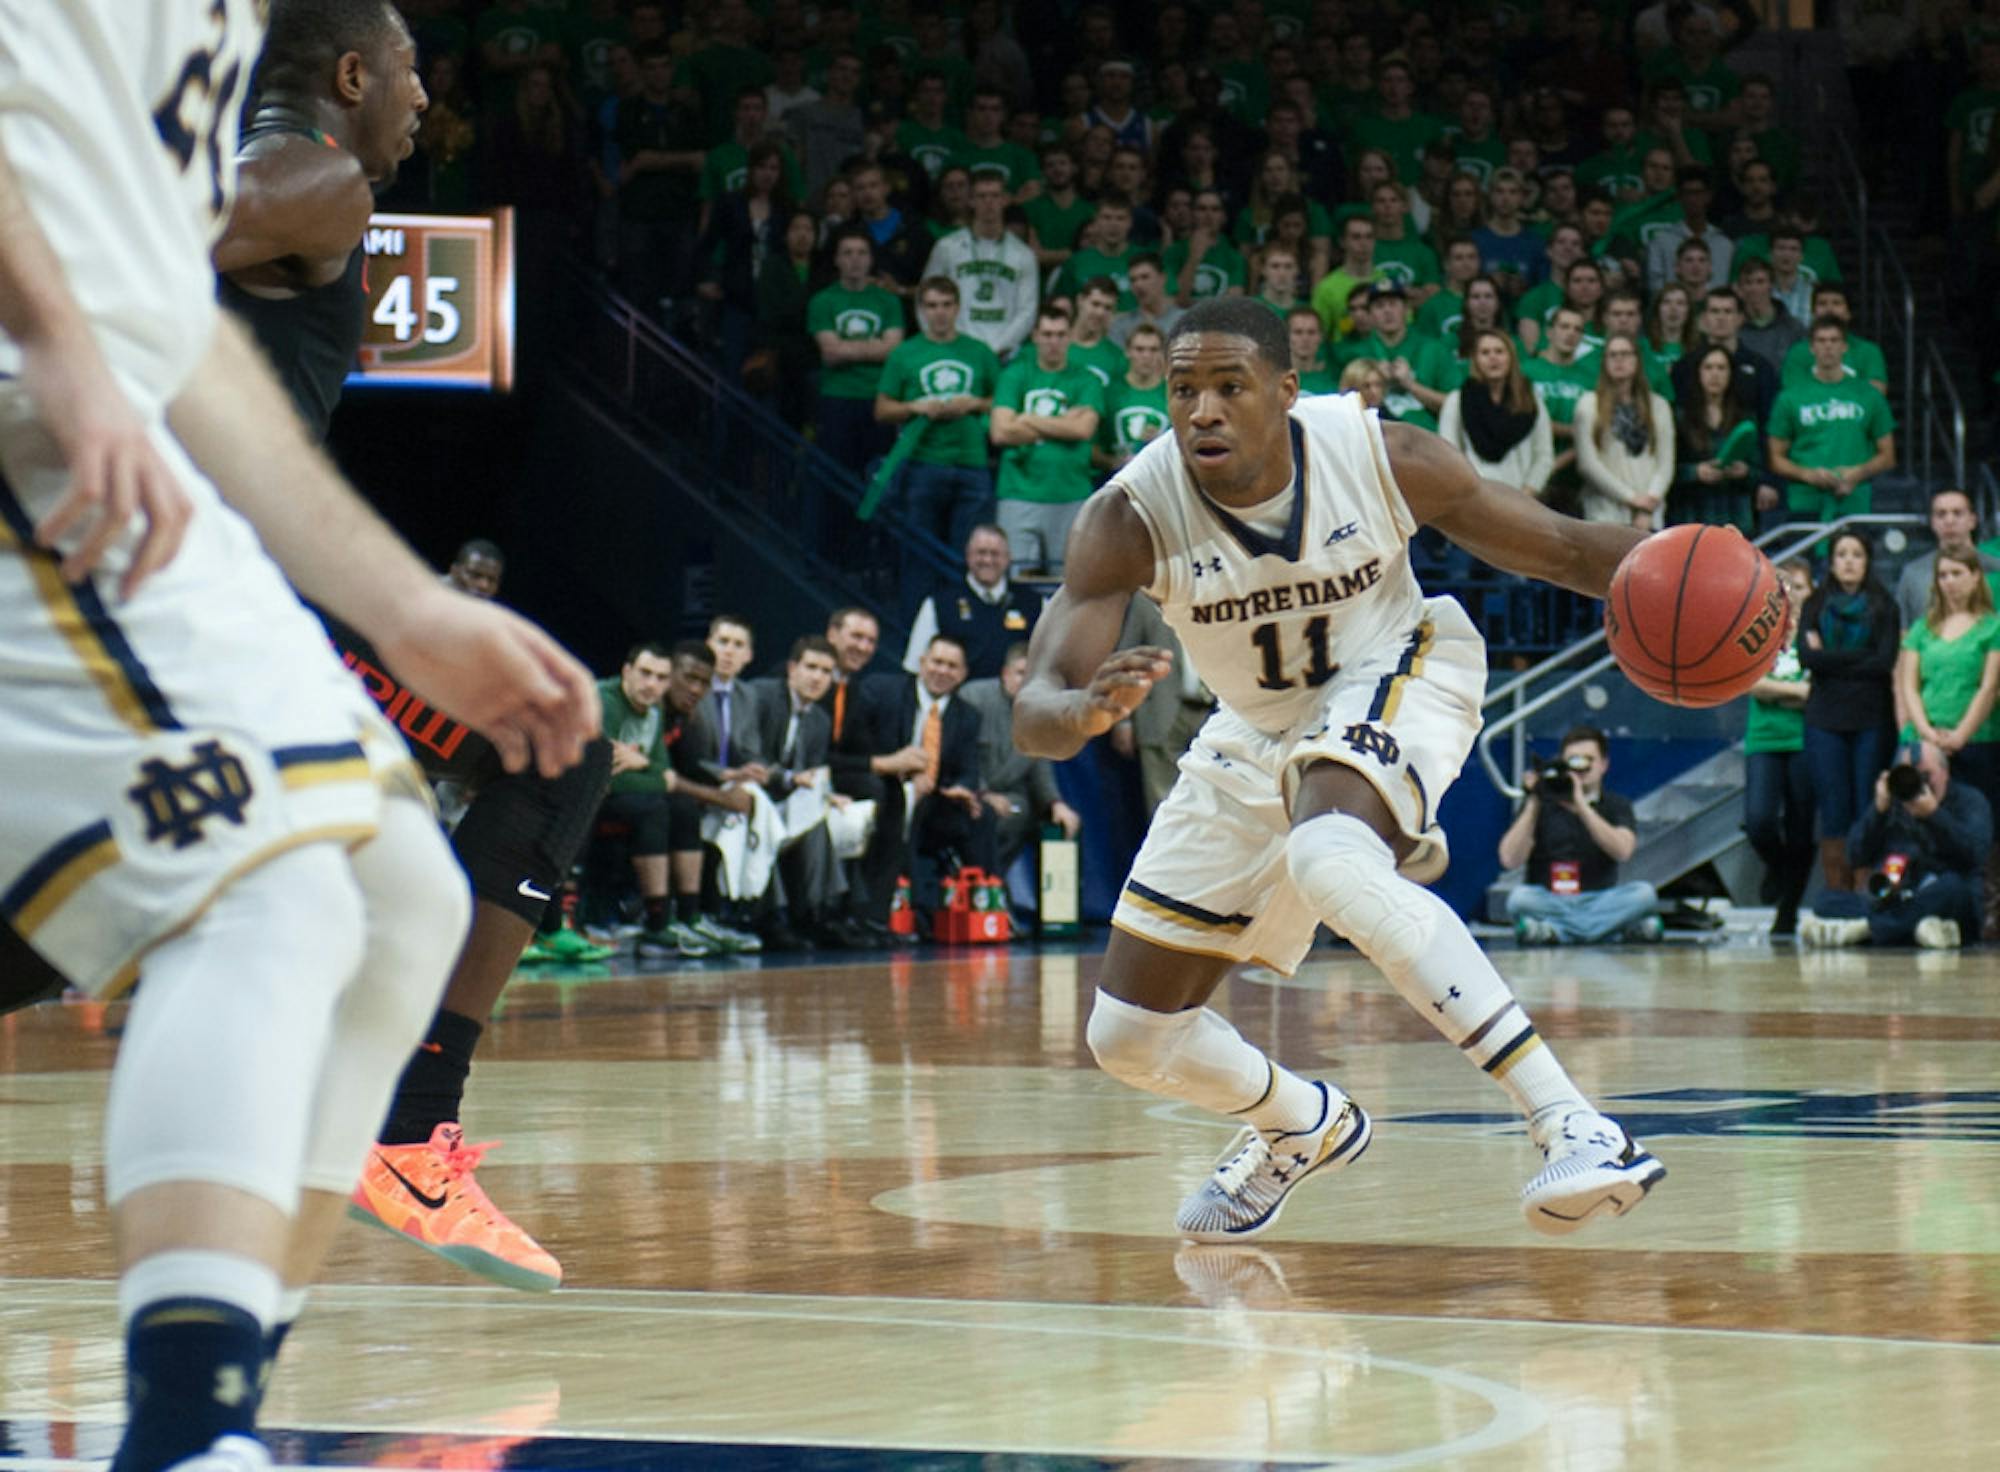 Irish sophomore guard Demetrius Jackson dribbles during Notre Dame’s 75-70 win against Miami on Saturday at Purcell Pavilion.